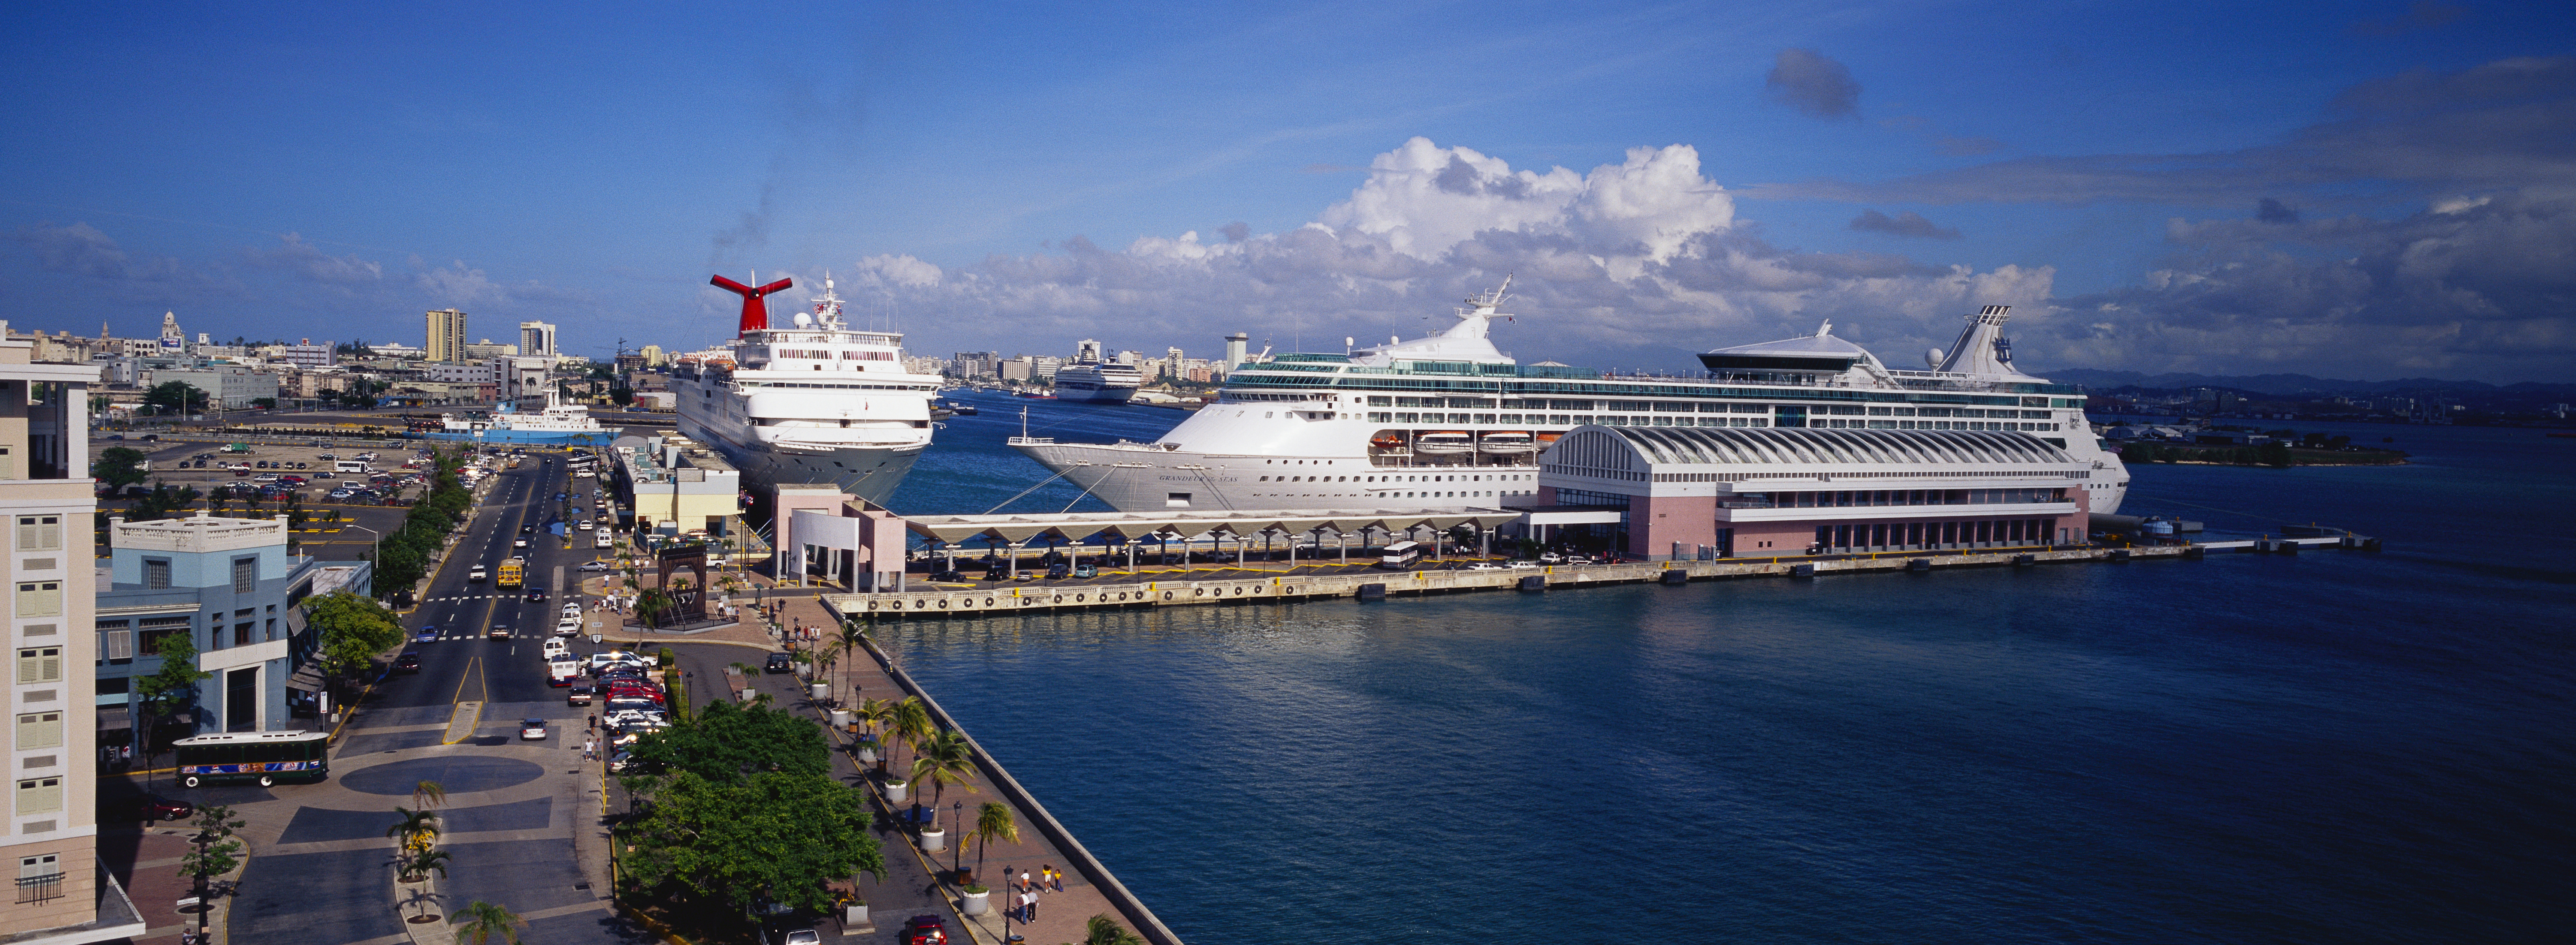 CRUISE NEWS: NO MORE LAST MINUTE CRUISE DEALS 